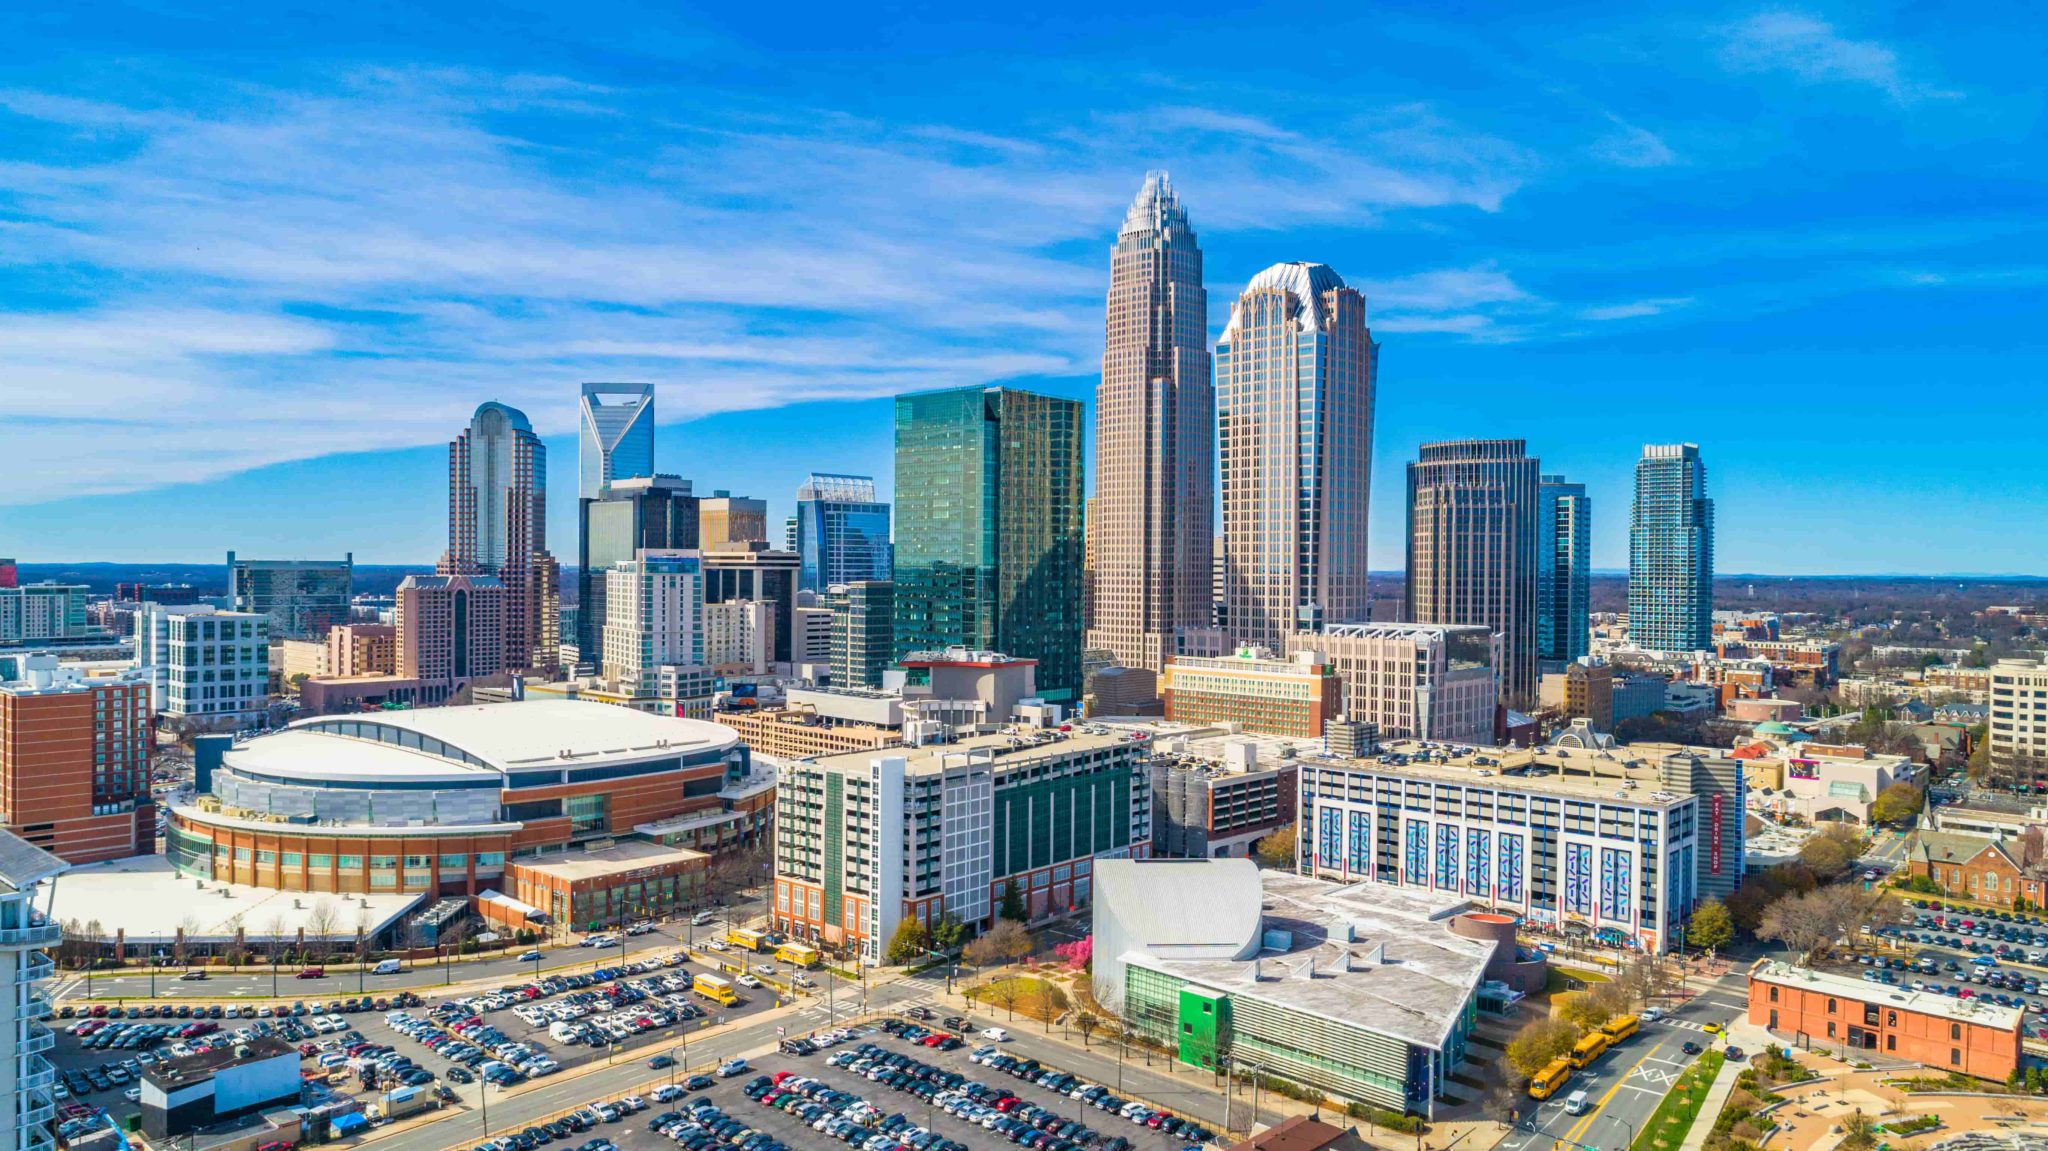 15 Best Event Venues in Charlotte in 2023